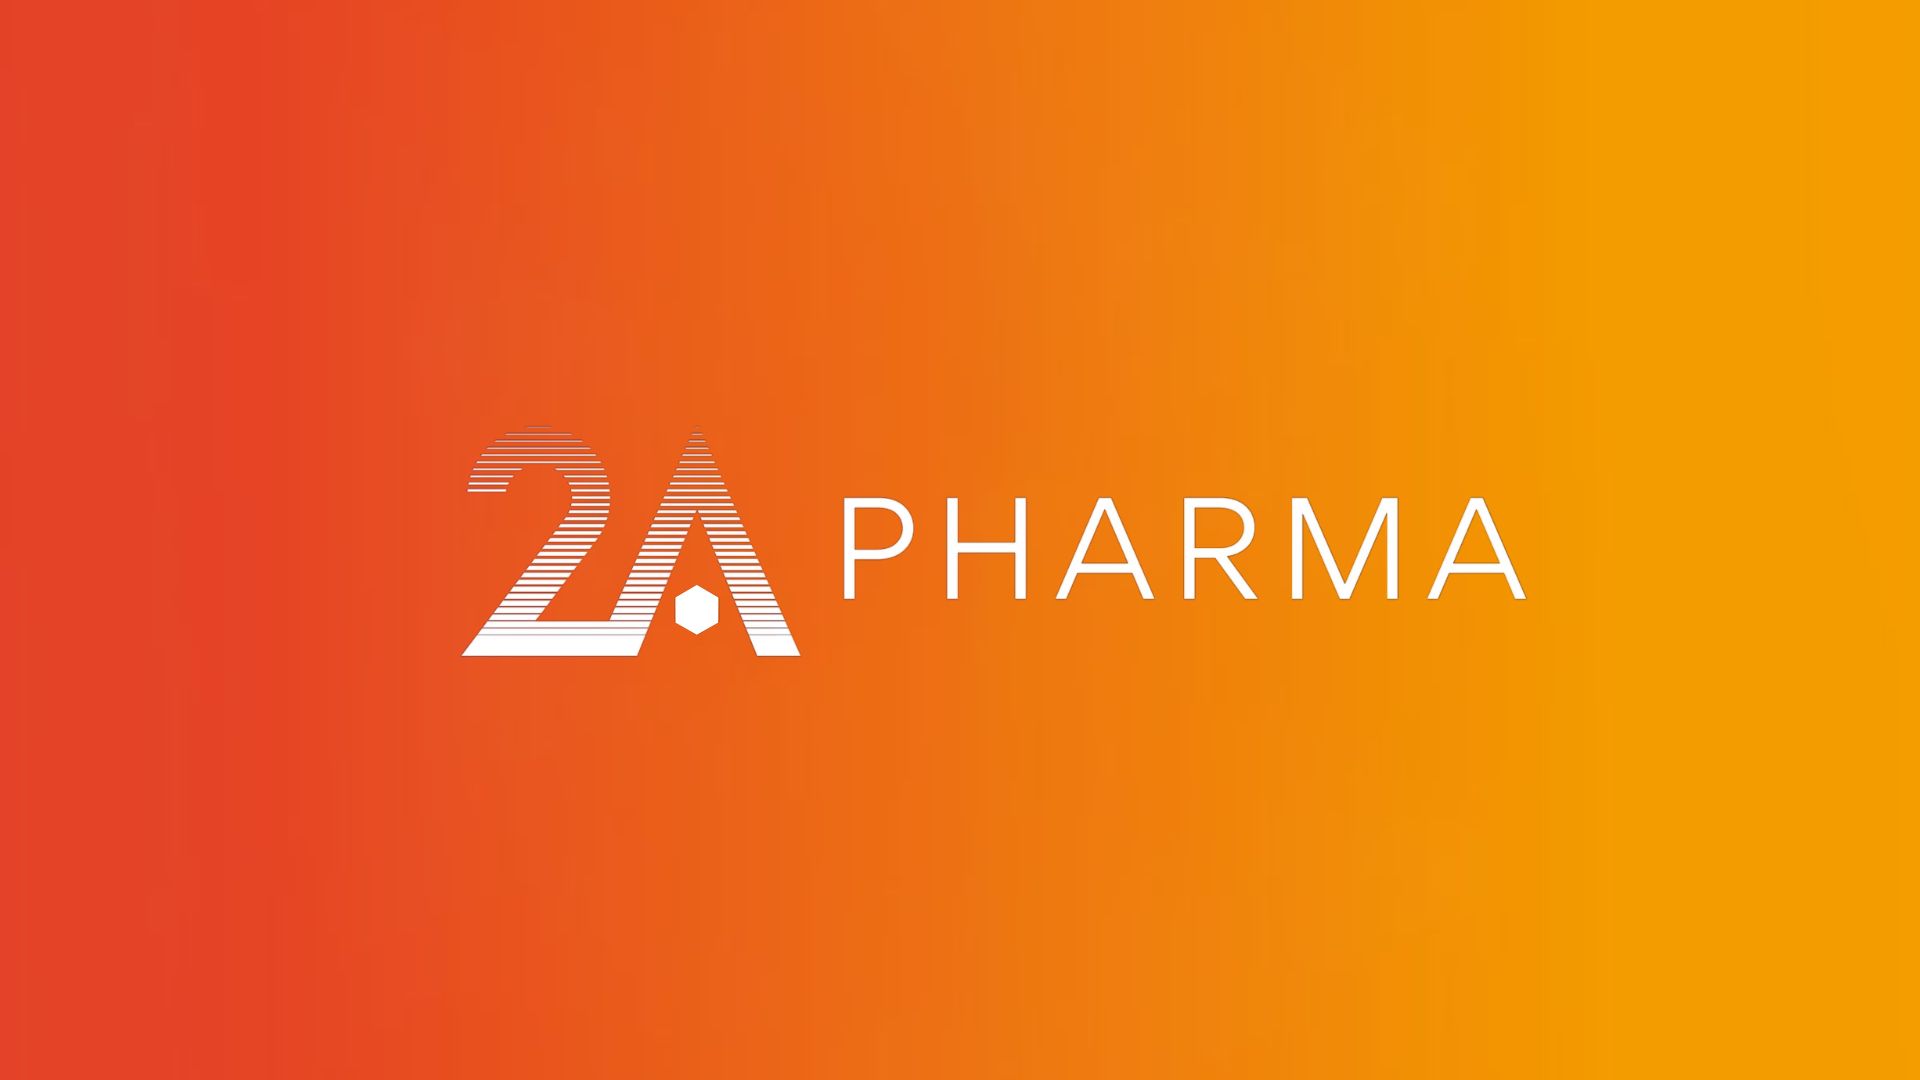 2A Pharma receives approval for phase 1 study of 2AP01